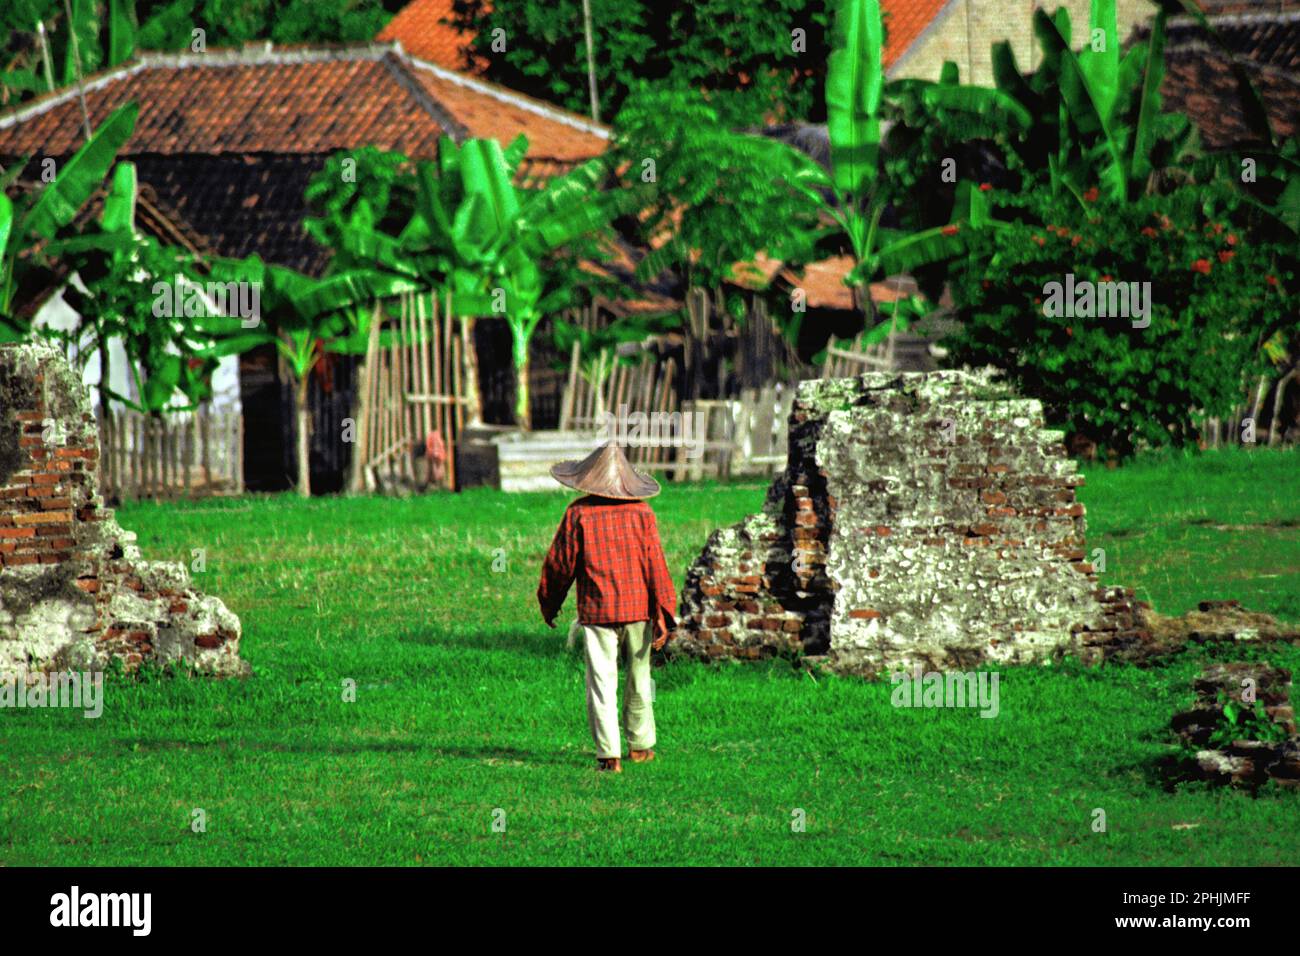 A villager wearing farmer hat is walking on grass field near the ruin of a building at Kaibon palace, one of the cultural heritage objects from Banten Sultanate period located in area now called Banten Lama (Old Banten) in Serang, Banten, Indonesia. 'The sustainability of cultural heritage is strongly linked to the effective participation of local communities in the conservation and management of these resources,' according to a team of scientists led by Sunday Oladipo Oladeji in their research article published on Sage Journals on October 28, 2022. Stock Photo